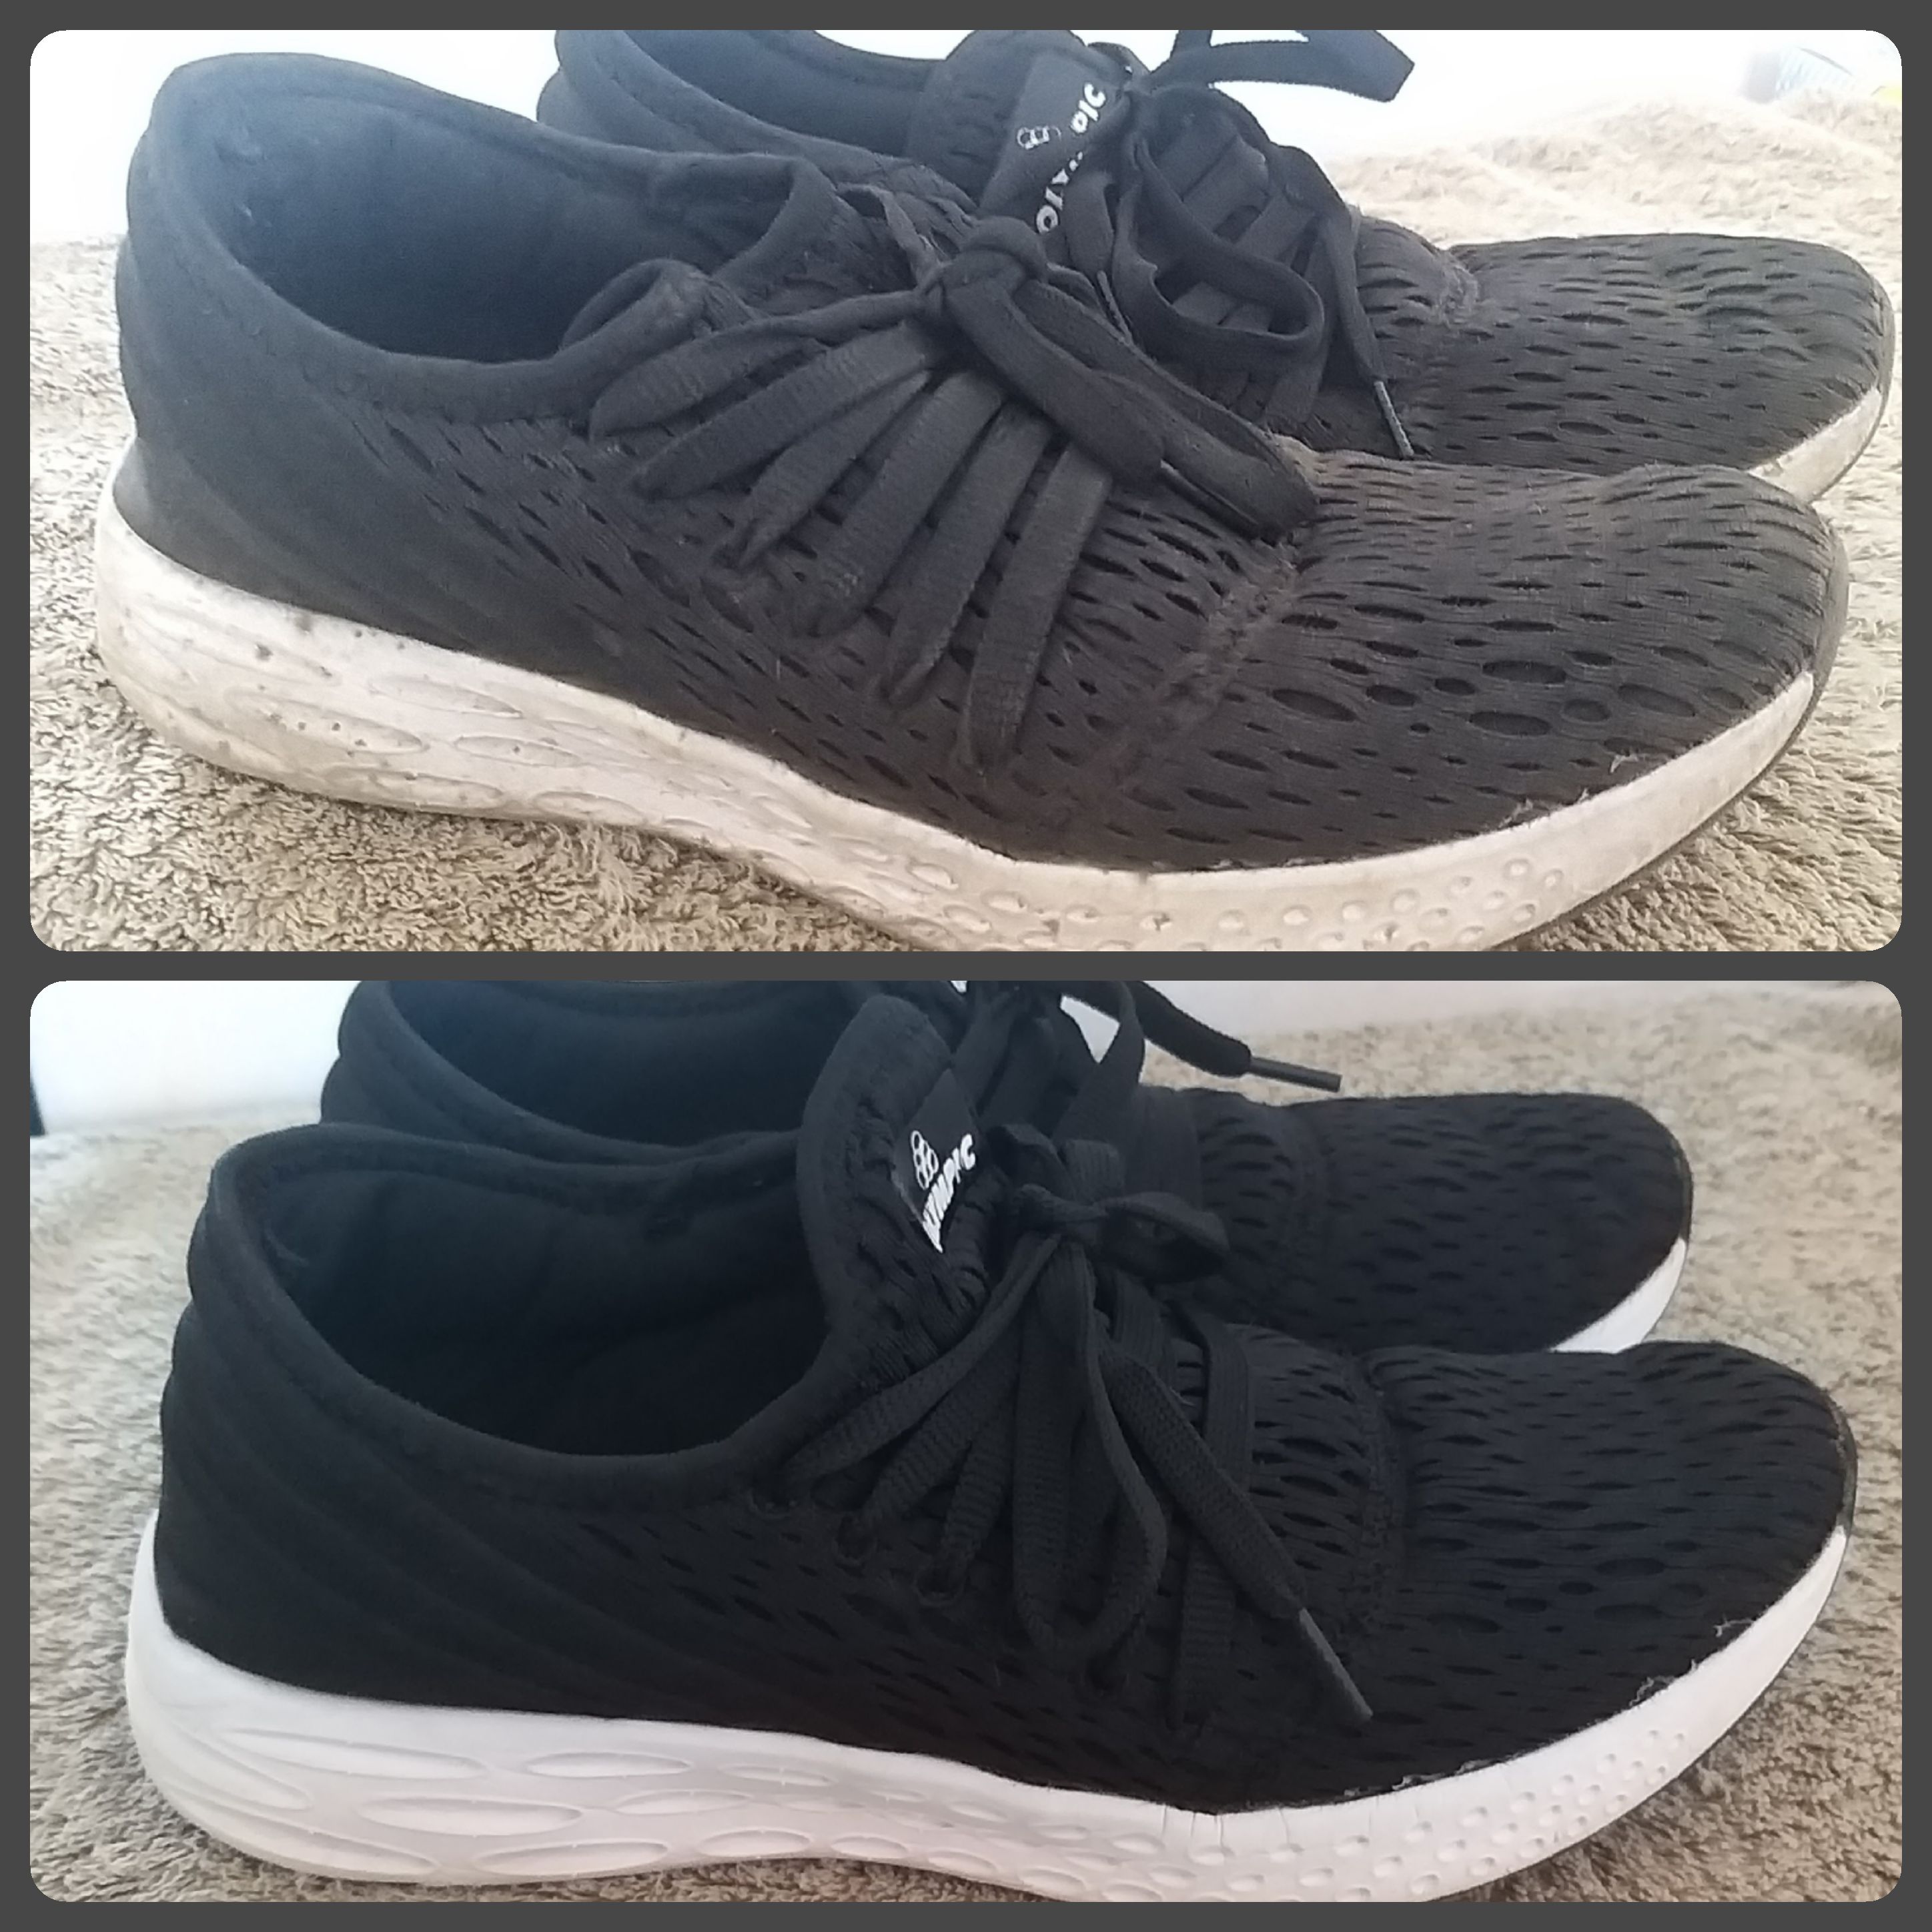 A client's shoes we cleaned, before & after pictures